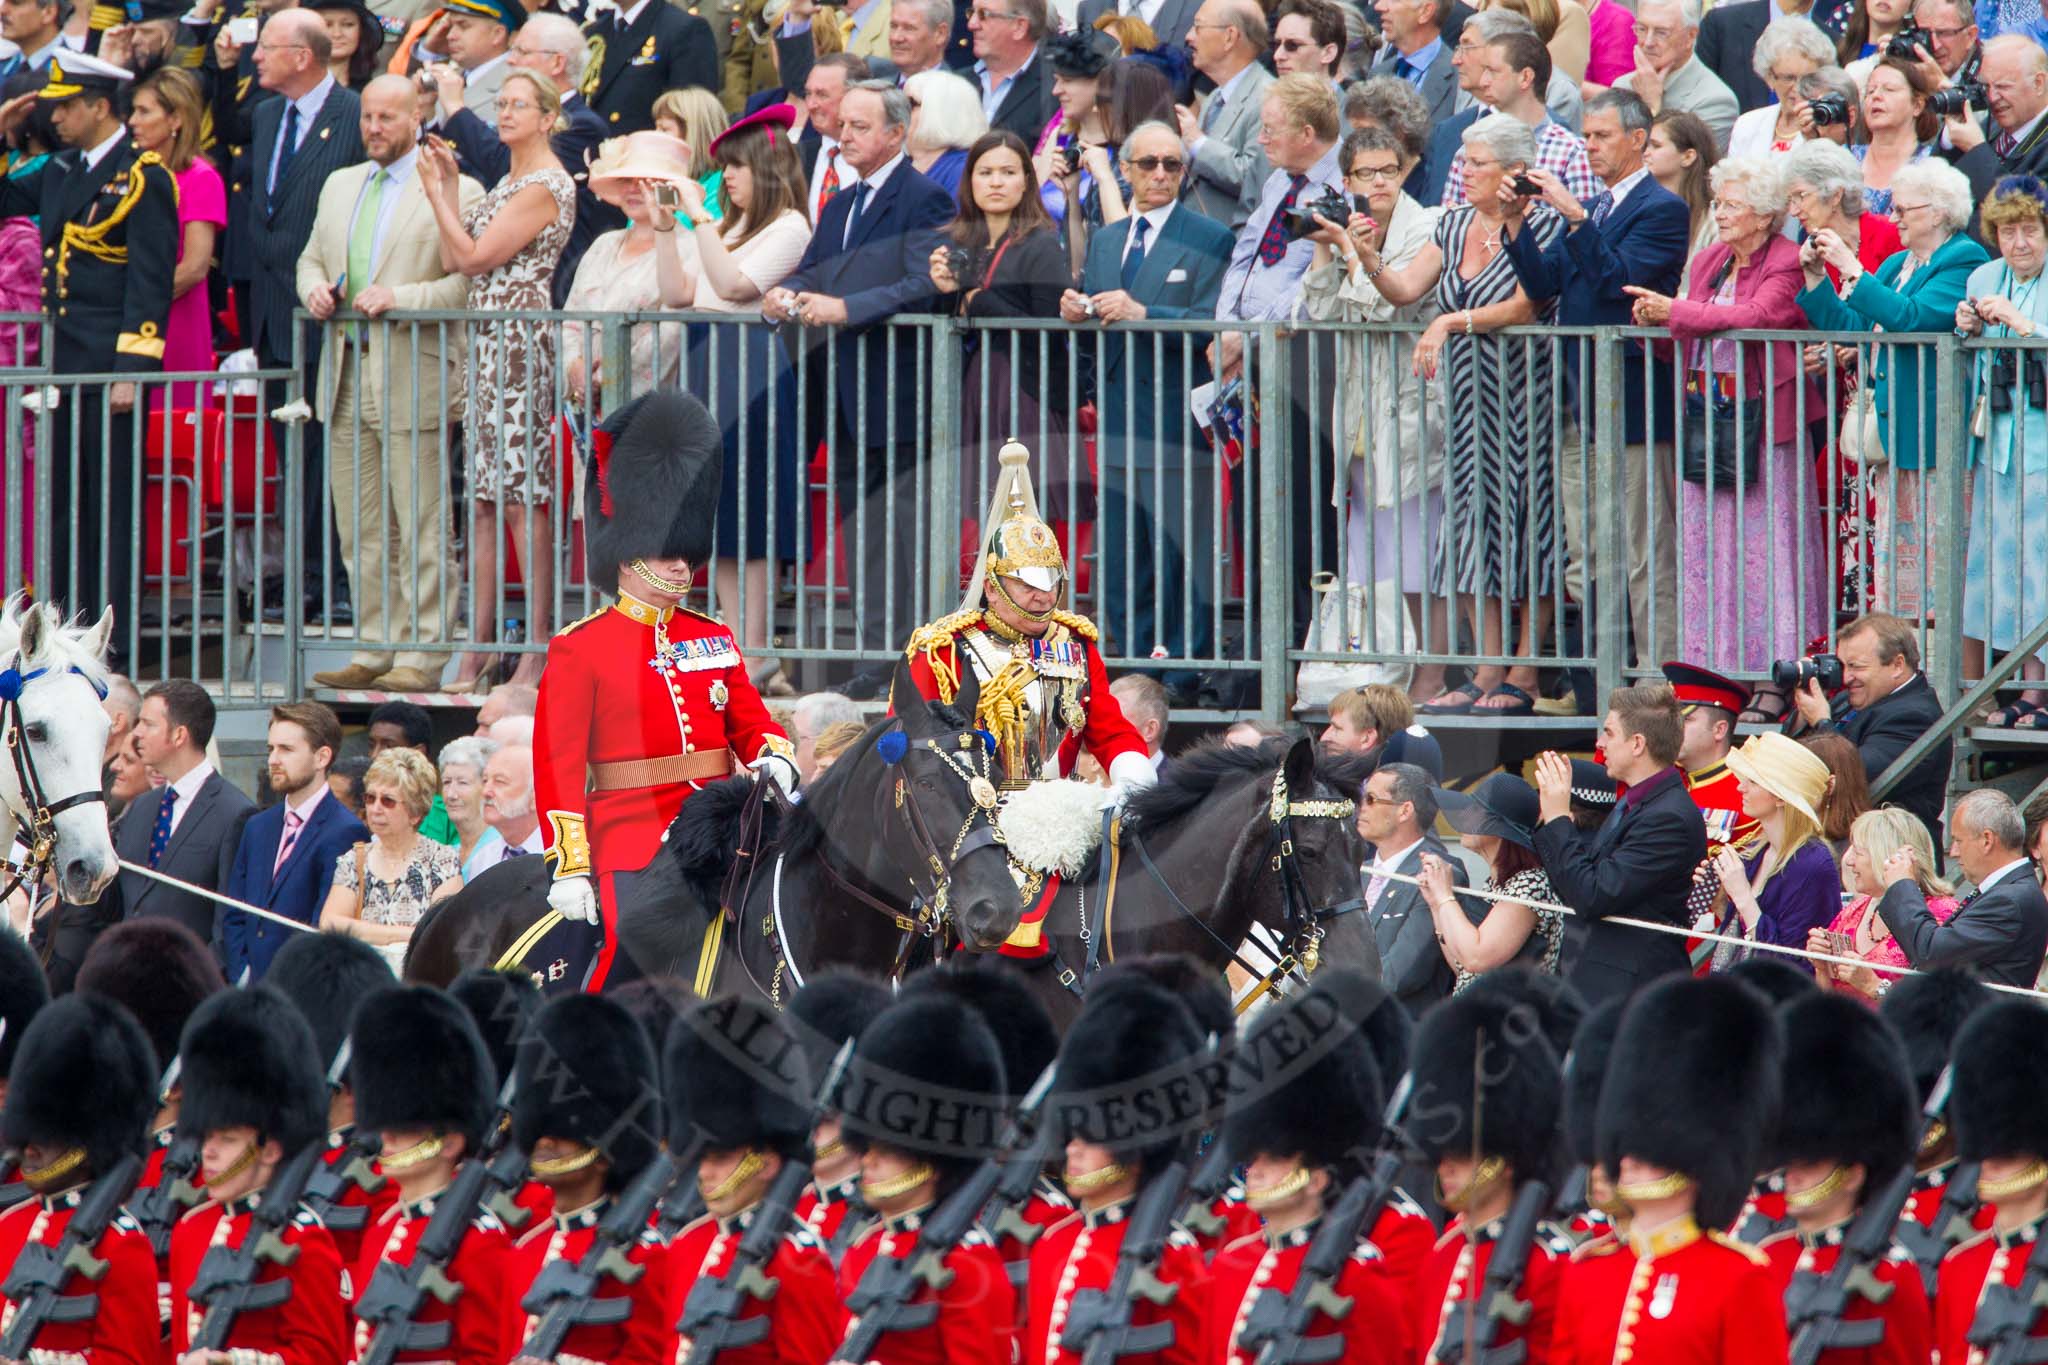 Trooping the Colour 2014.
Horse Guards Parade, Westminster,
London SW1A,

United Kingdom,
on 14 June 2014 at 10:58, image #348